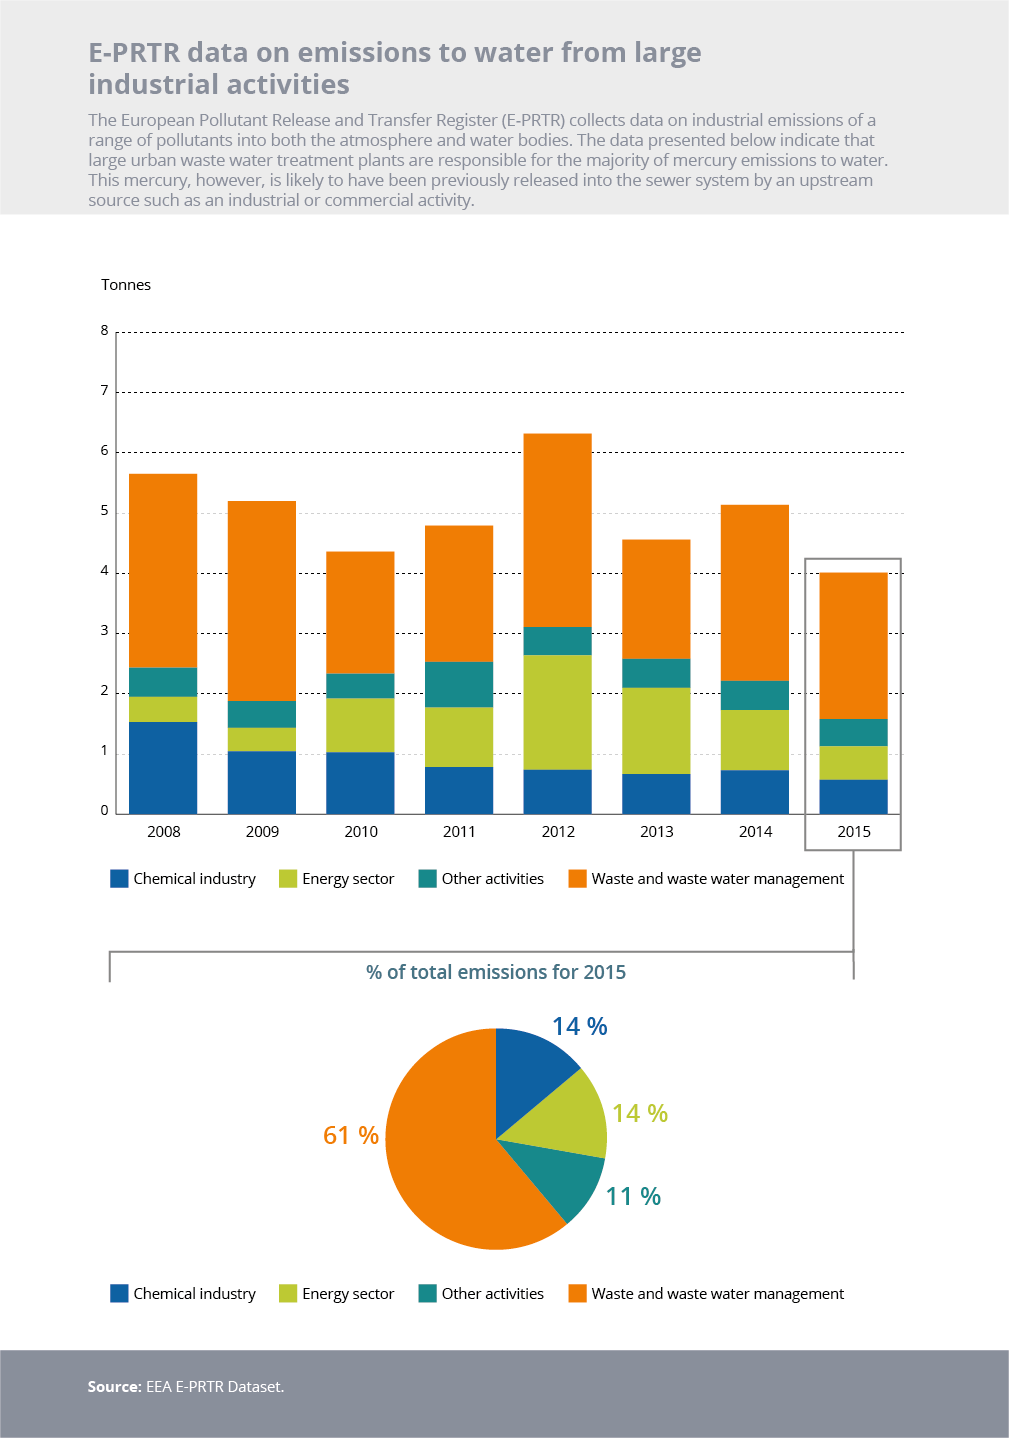 E-PRTR data on emissions to water from large industrial activities